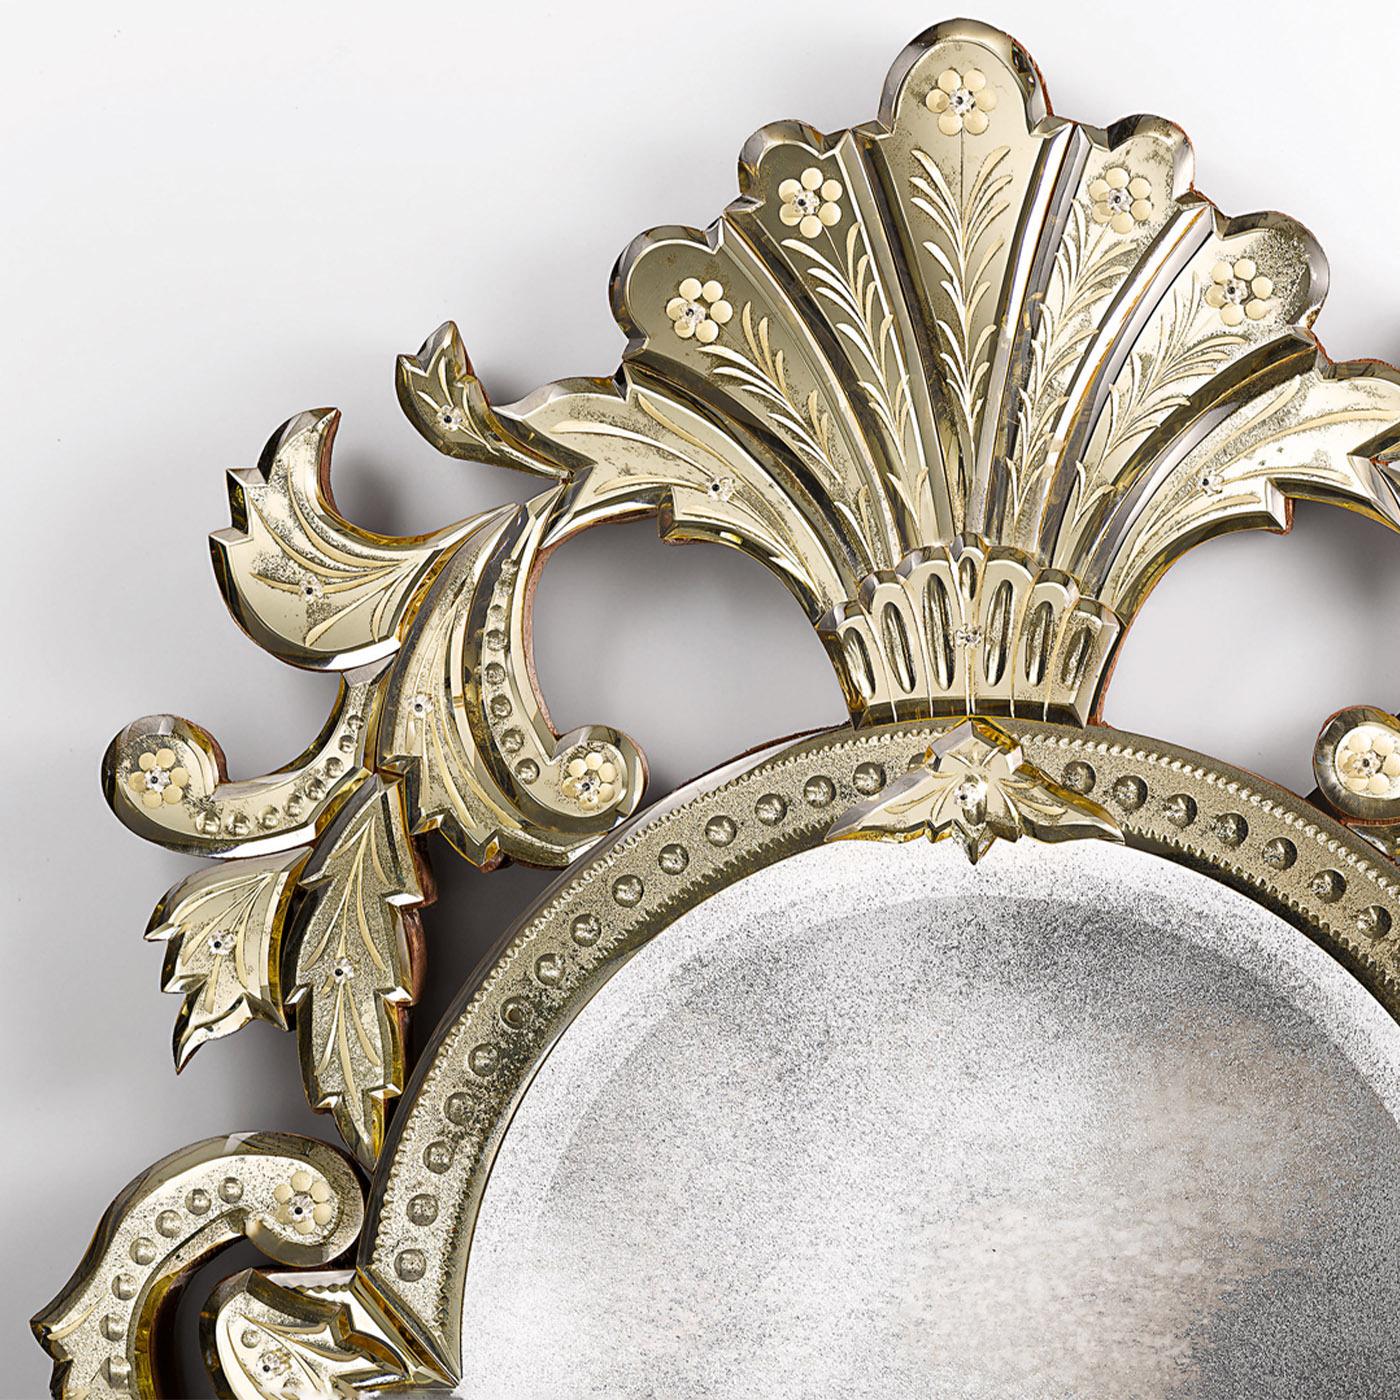 Part of the Louix XIV Collection, this elaborate mirror is inspired by the 18th-century French style. Fretwork structure made of fir wood with natural color and antique finish. Central part made of bevelled glass with medium antique mirrored finish.